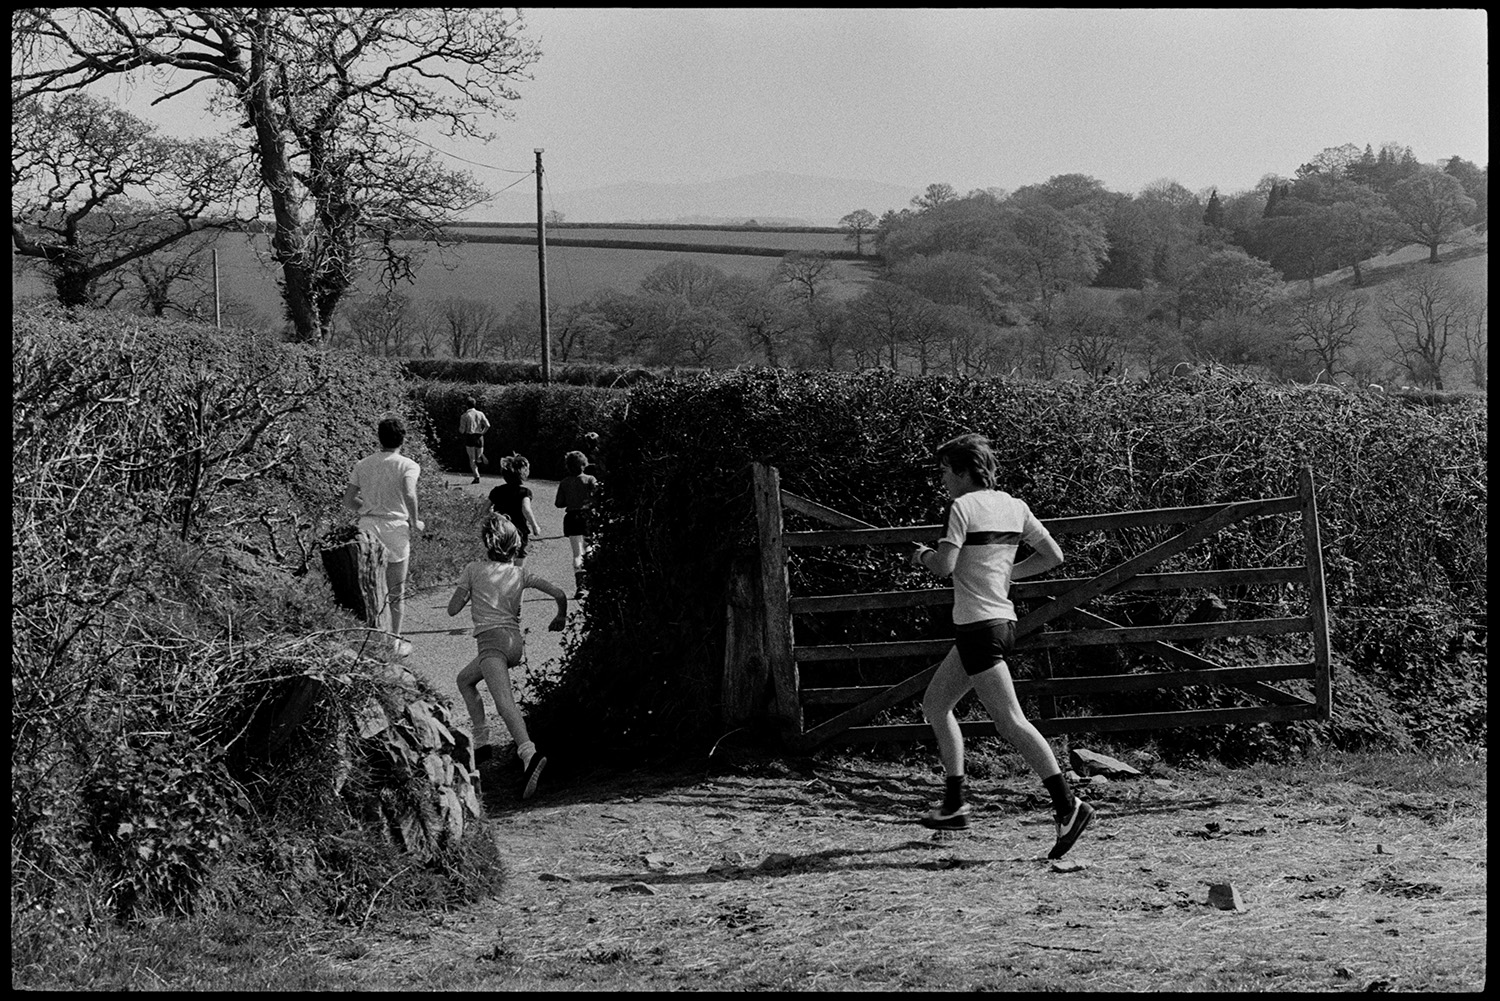 Club Day. Sports, running races, wellie throwing, prizes being given out.
[Men and children running through a field gate and down a road in a race at Iddesleigh Club Day.]